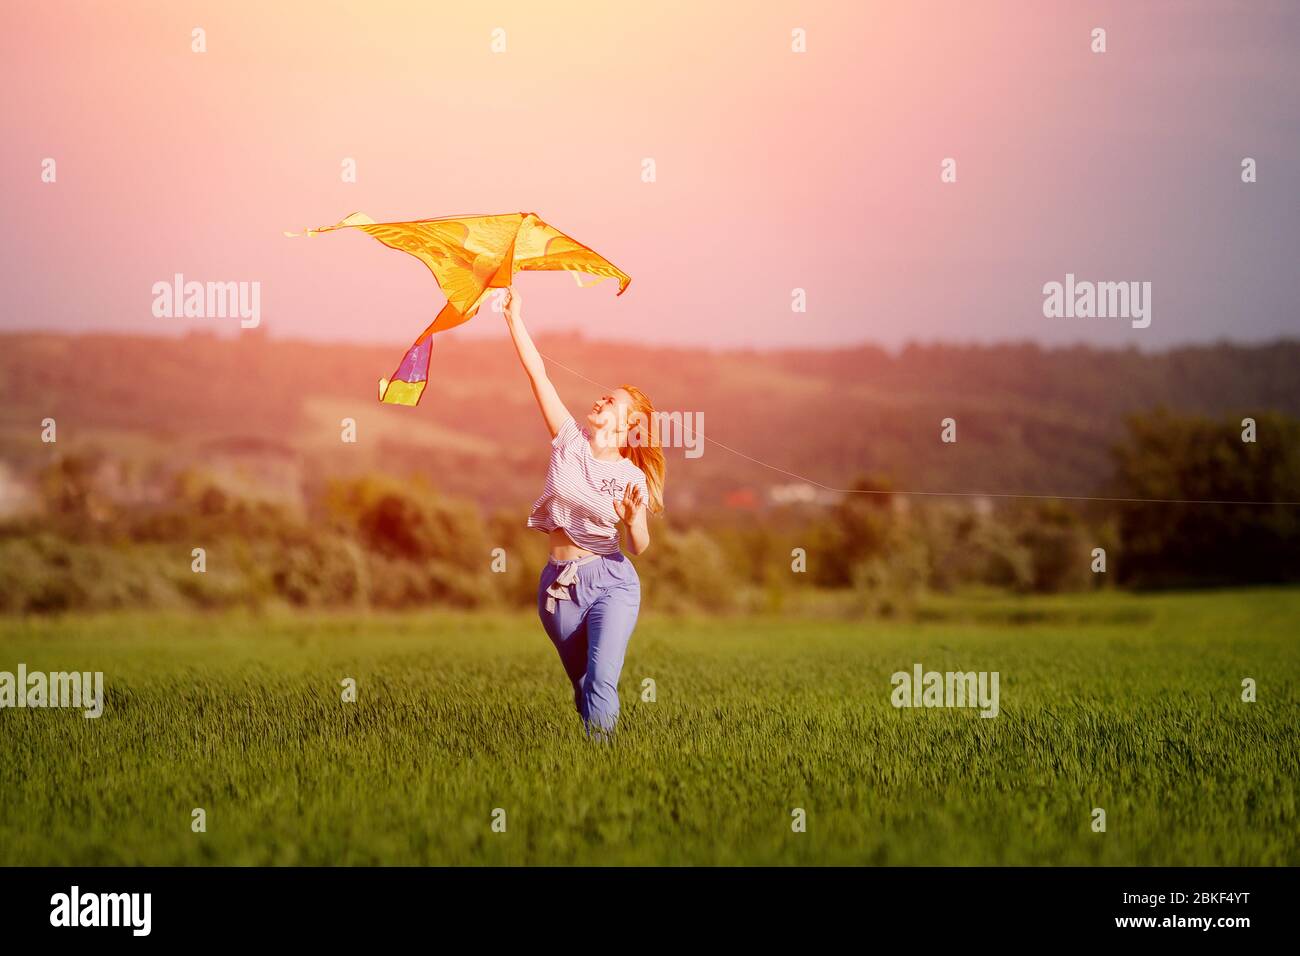 Young woman runs with kite through clean field at sunset, wind blows her hair. Concept of freedom from shackles, judgments. Stock Photo